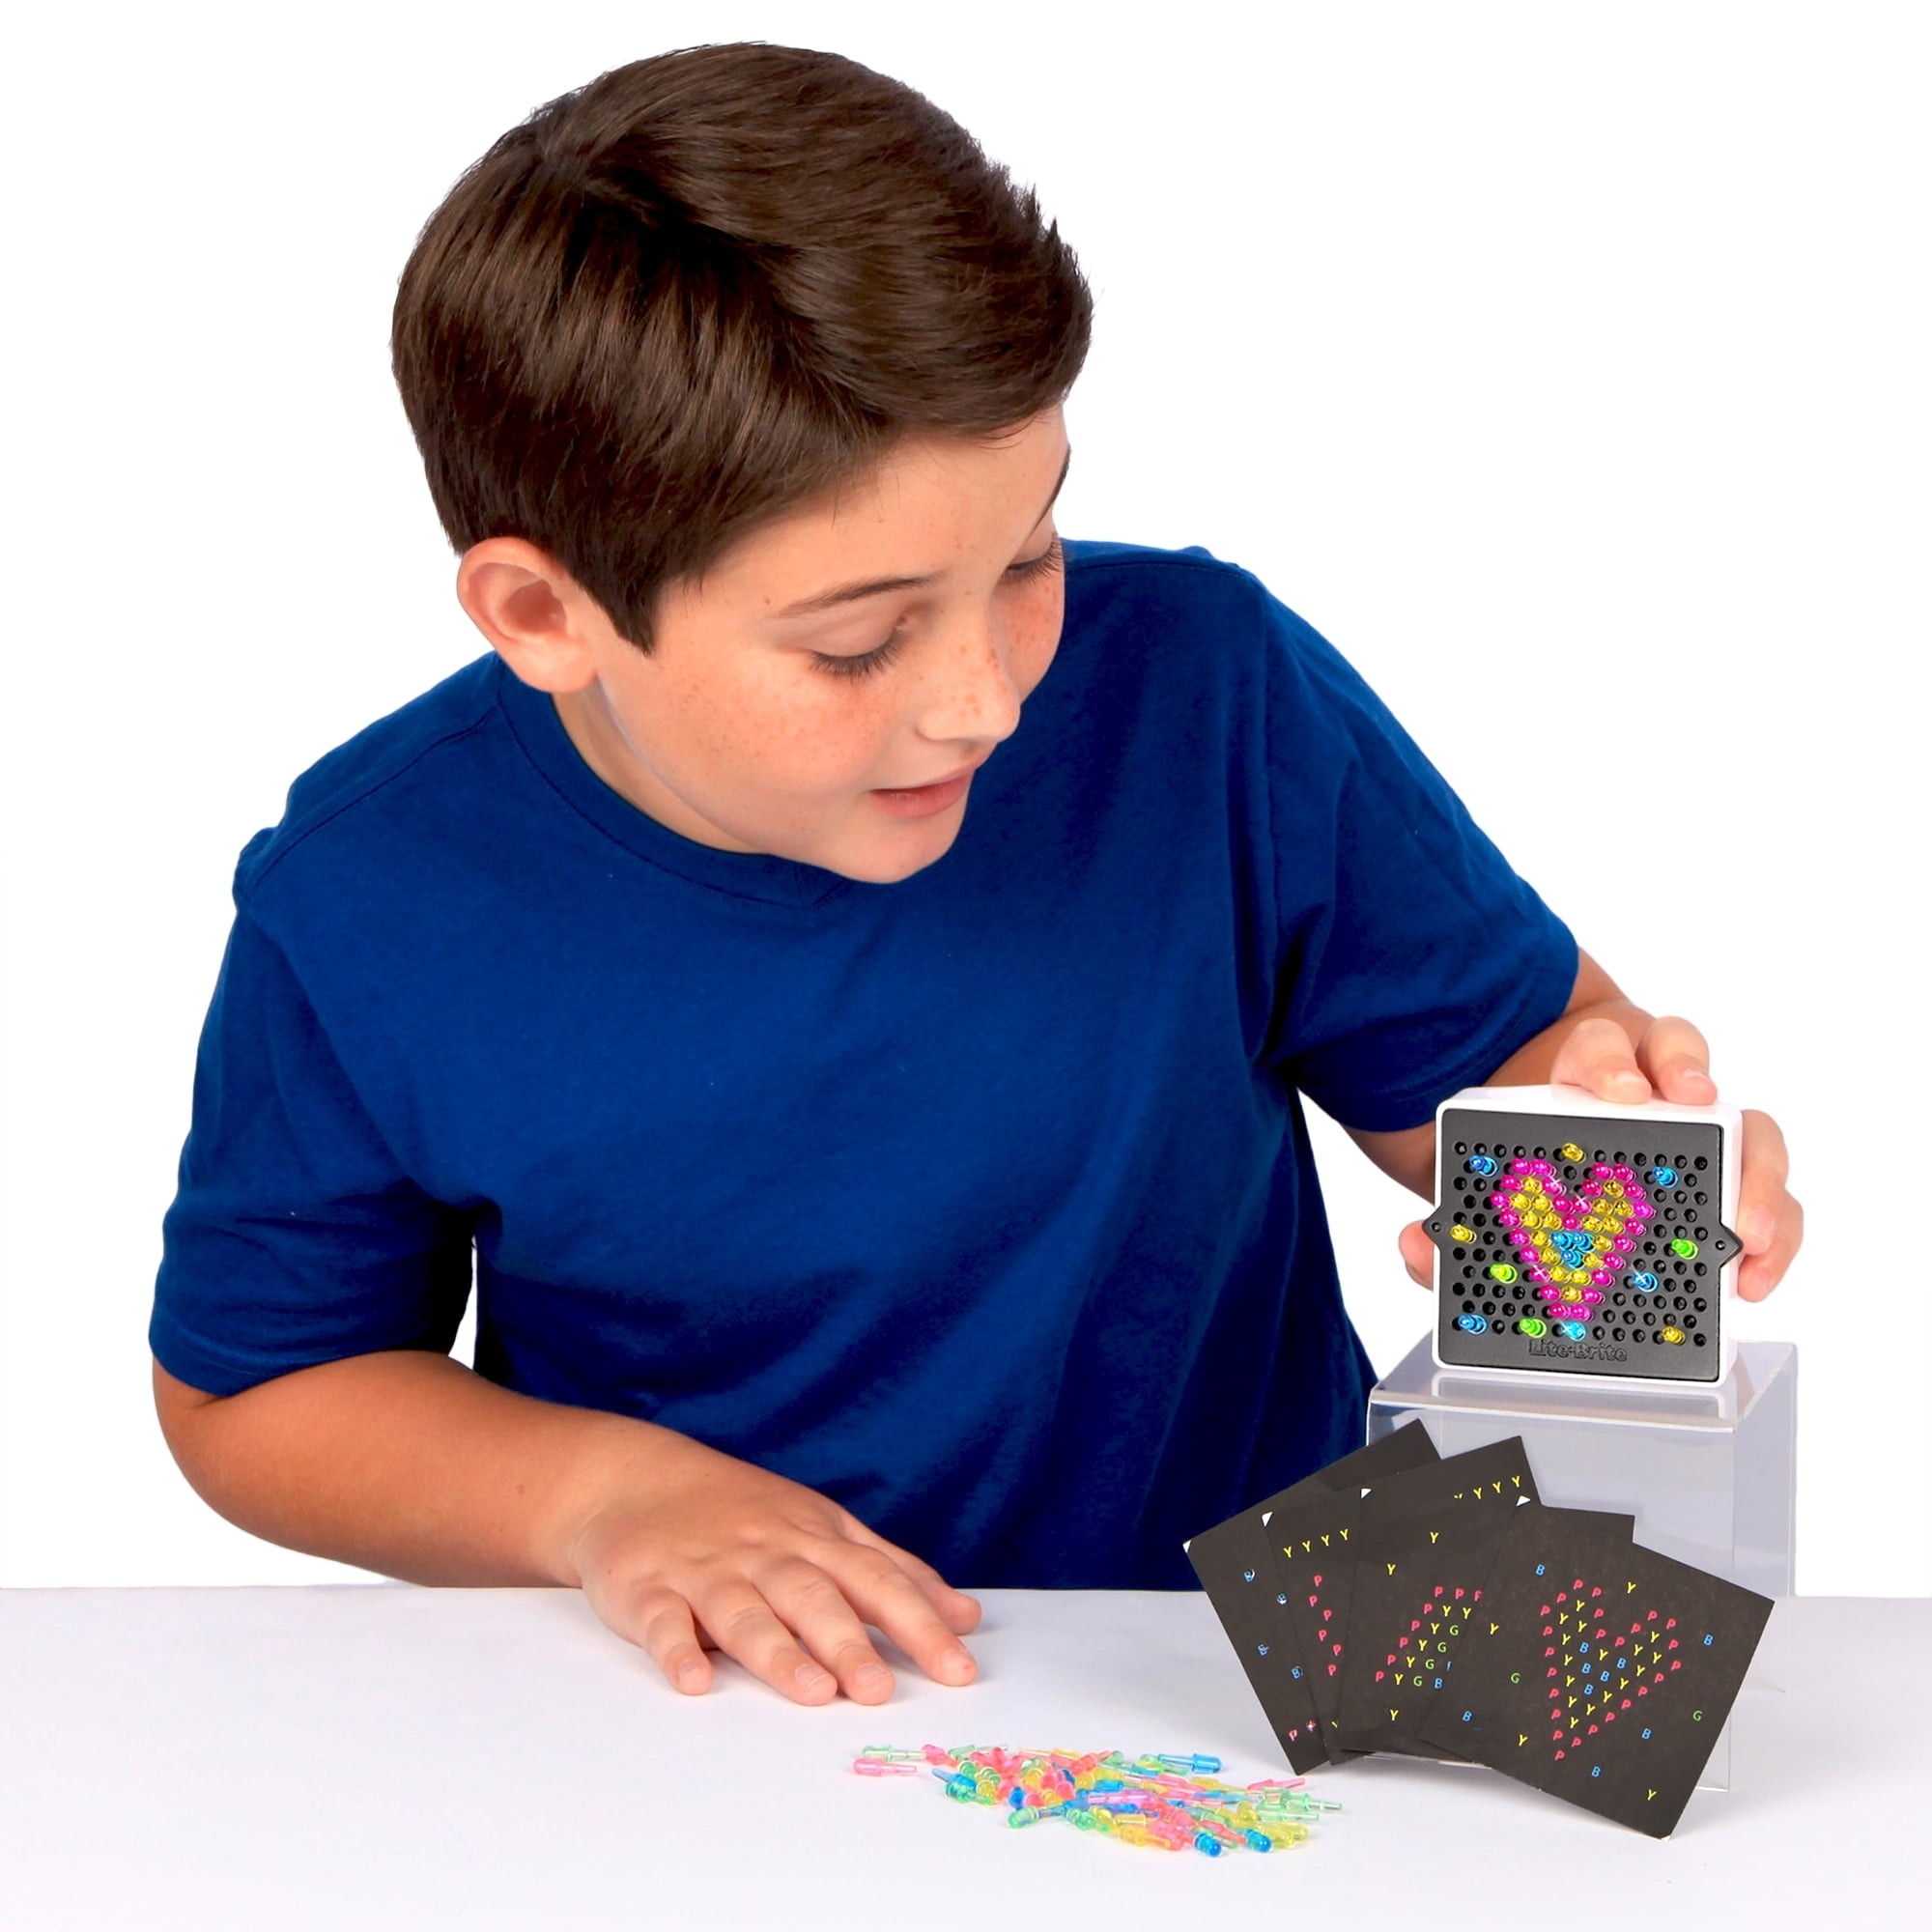 child playing with colorful light boards